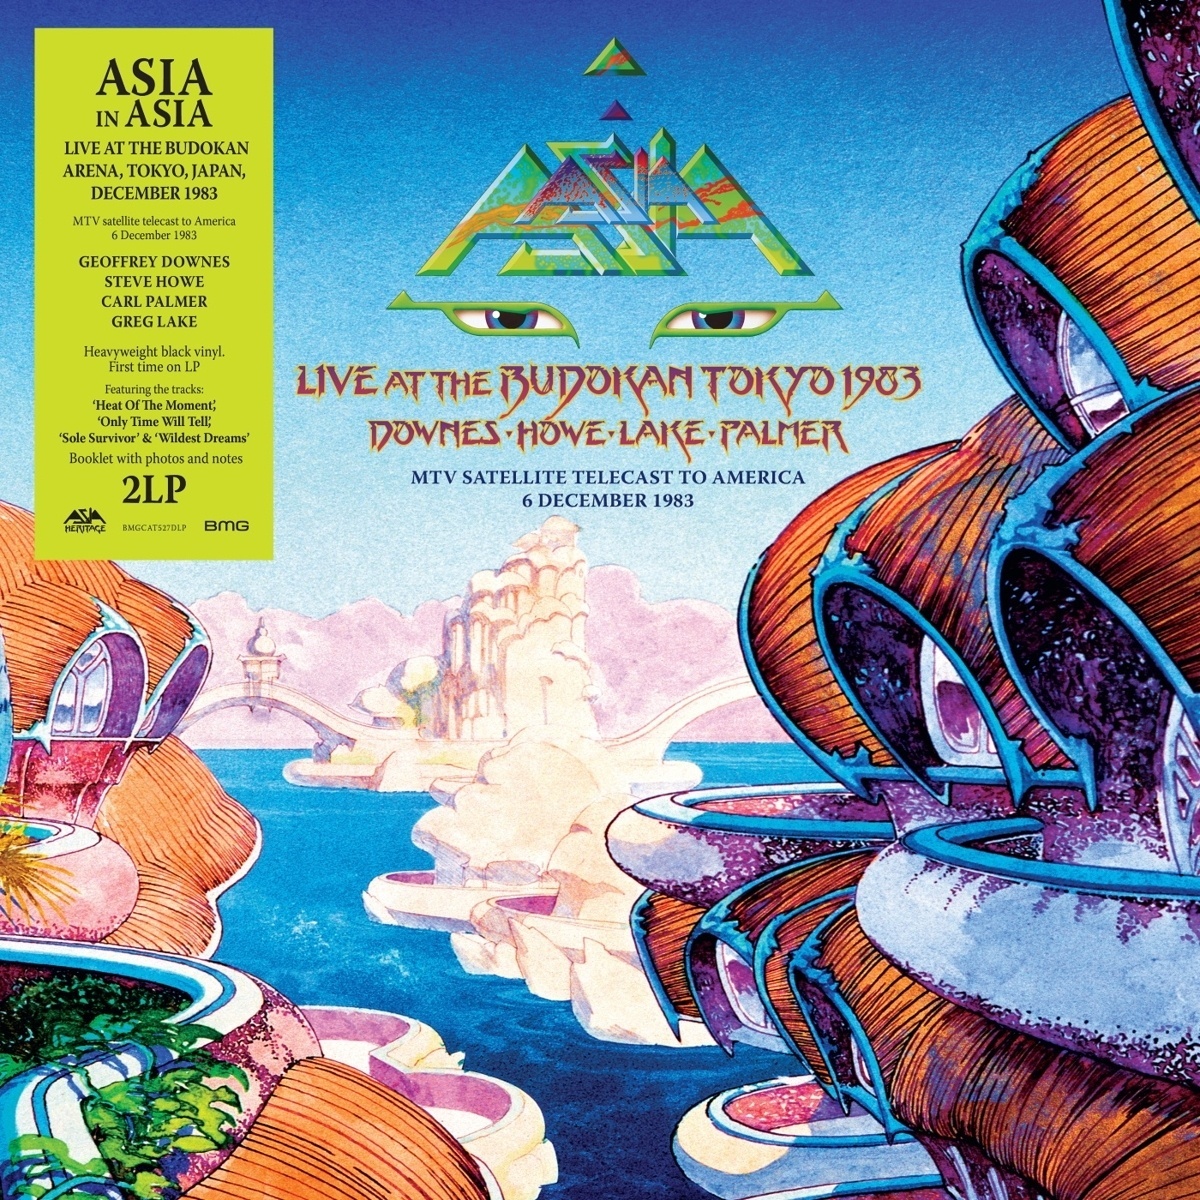 Asia In Asia - Live At The Budokan Tokyo 1983 (2 LPs) (Vinyl) - Asia. (LP)